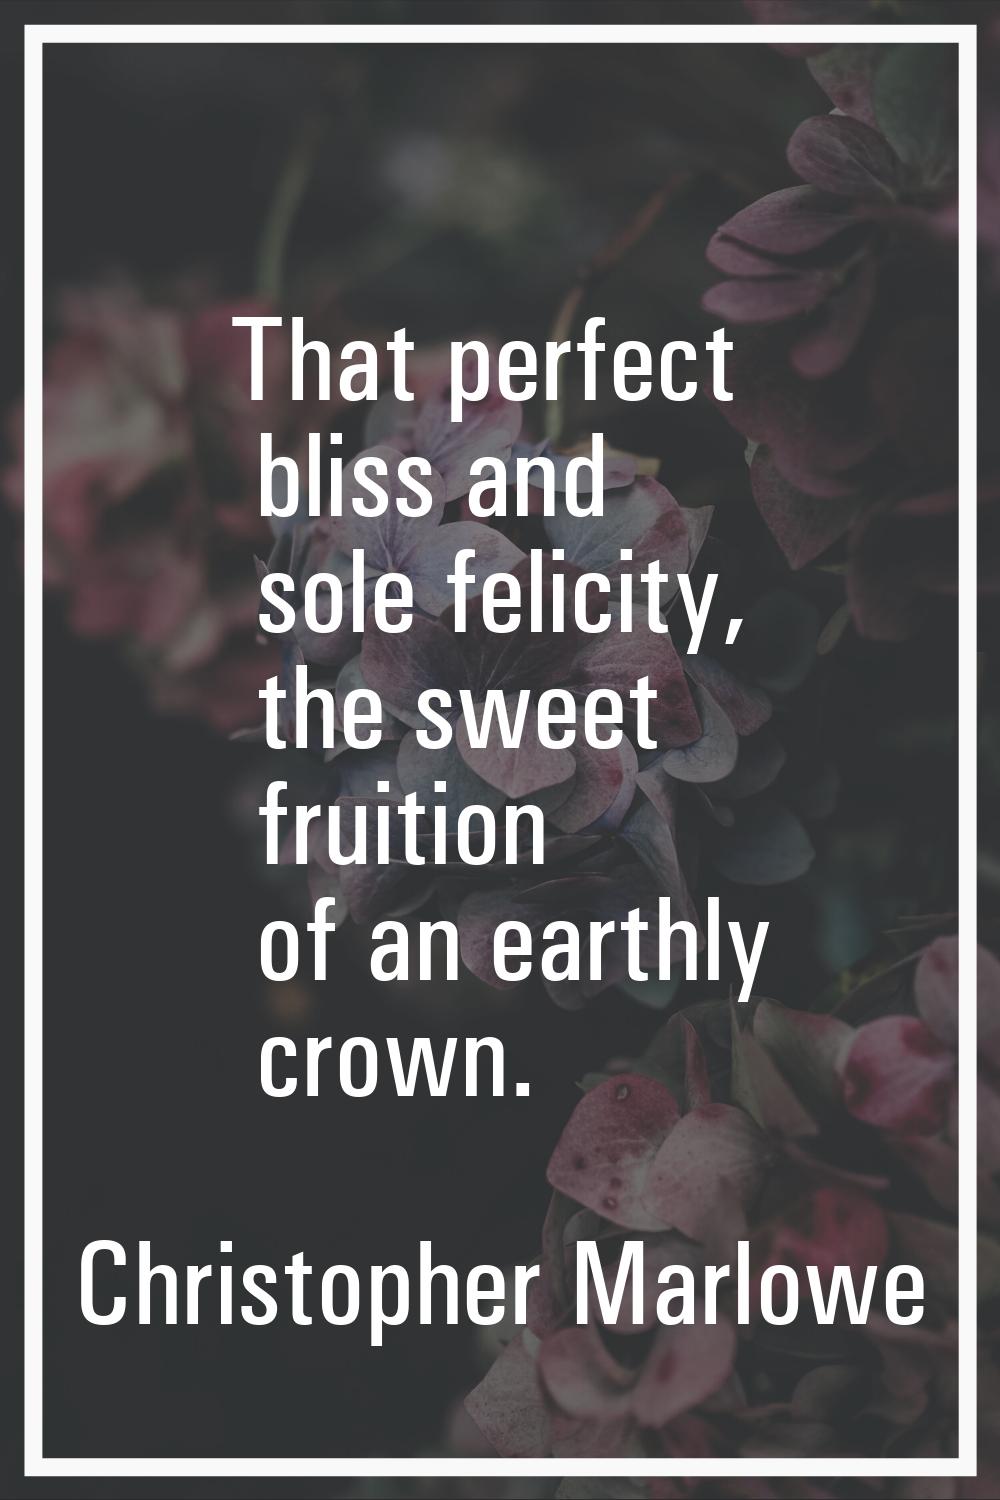 That perfect bliss and sole felicity, the sweet fruition of an earthly crown.